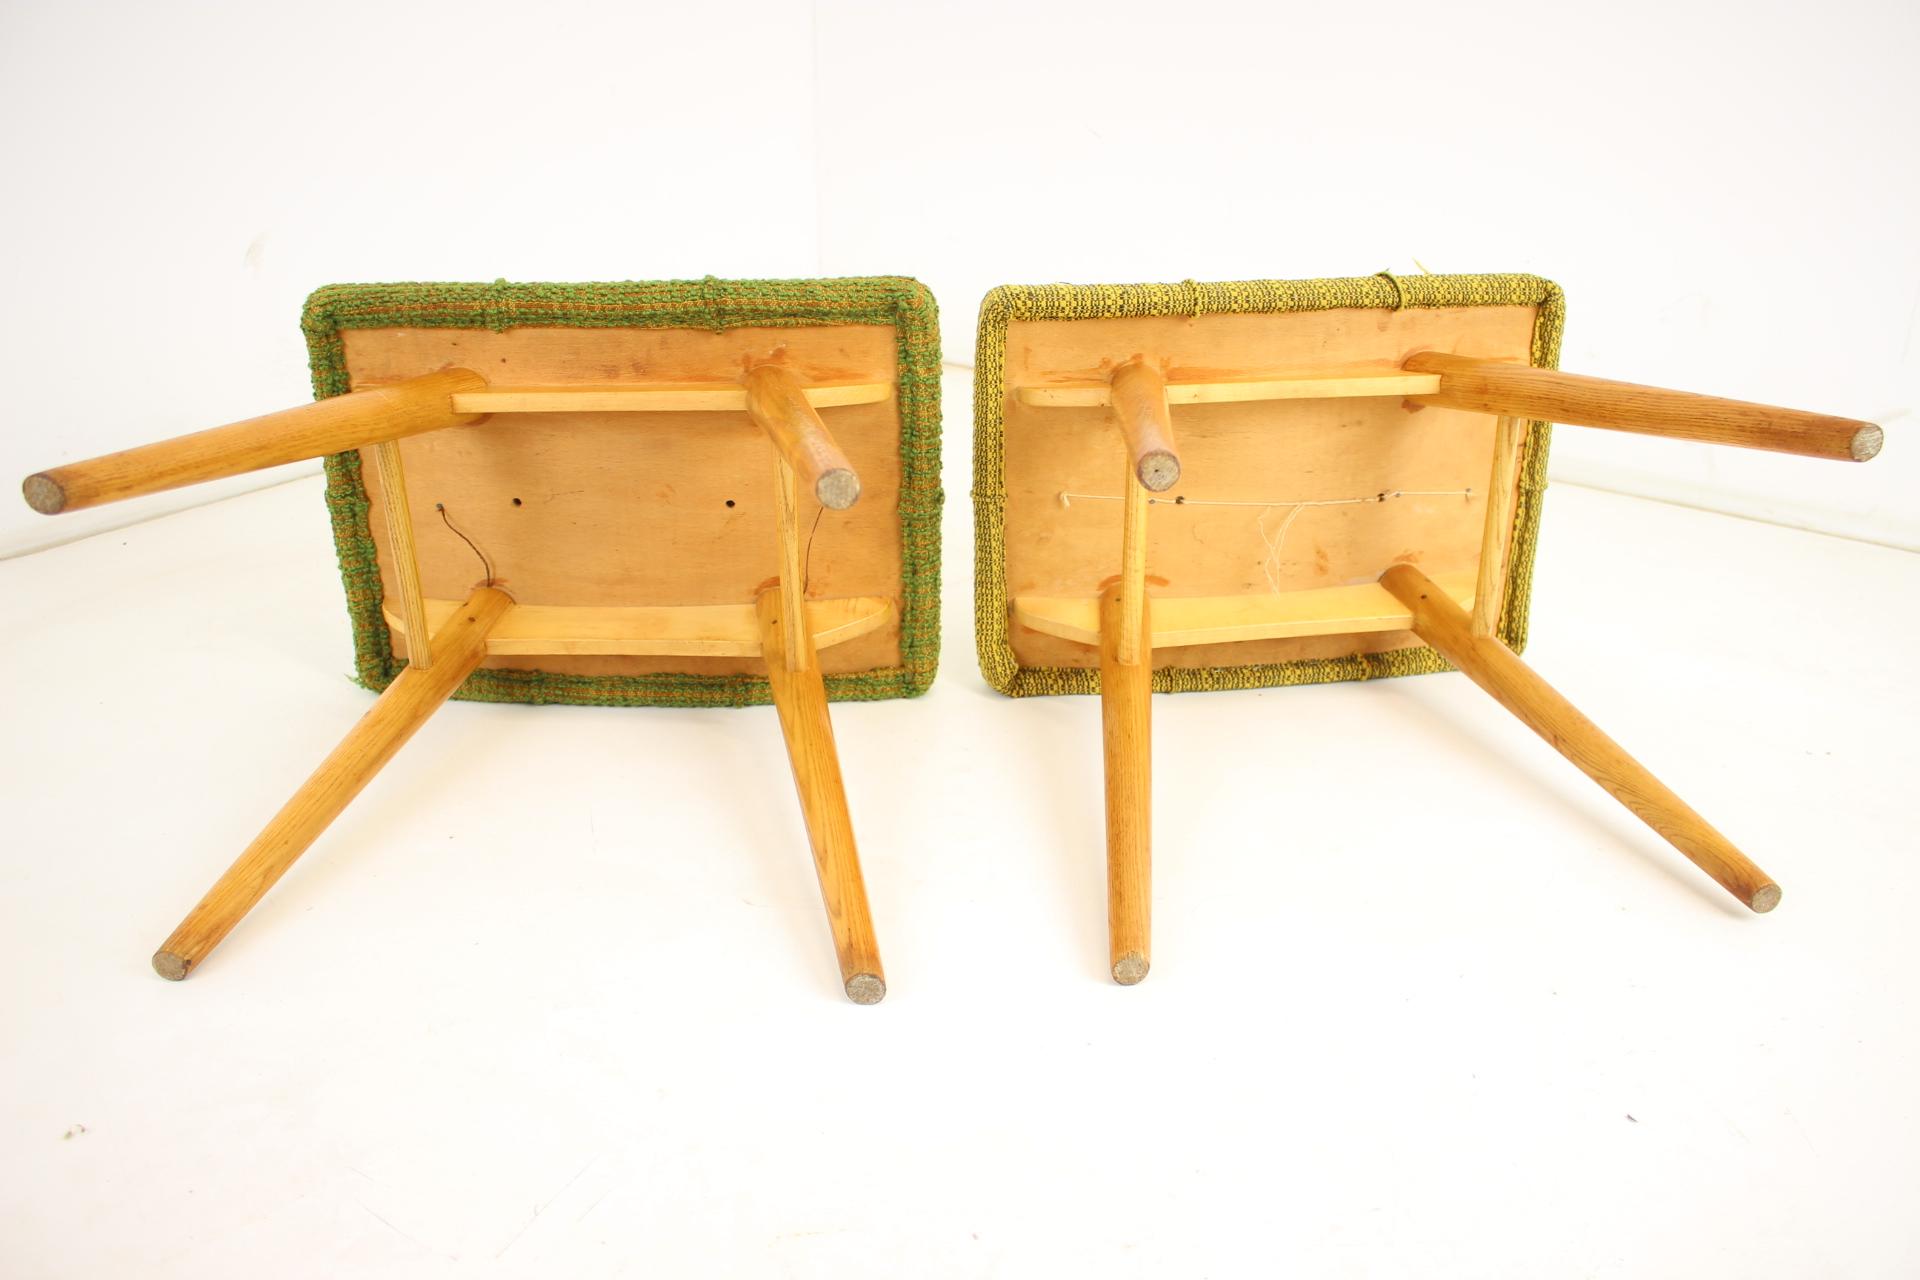 1960s Pair of Wooden Stools, Czechoslovakia For Sale 1